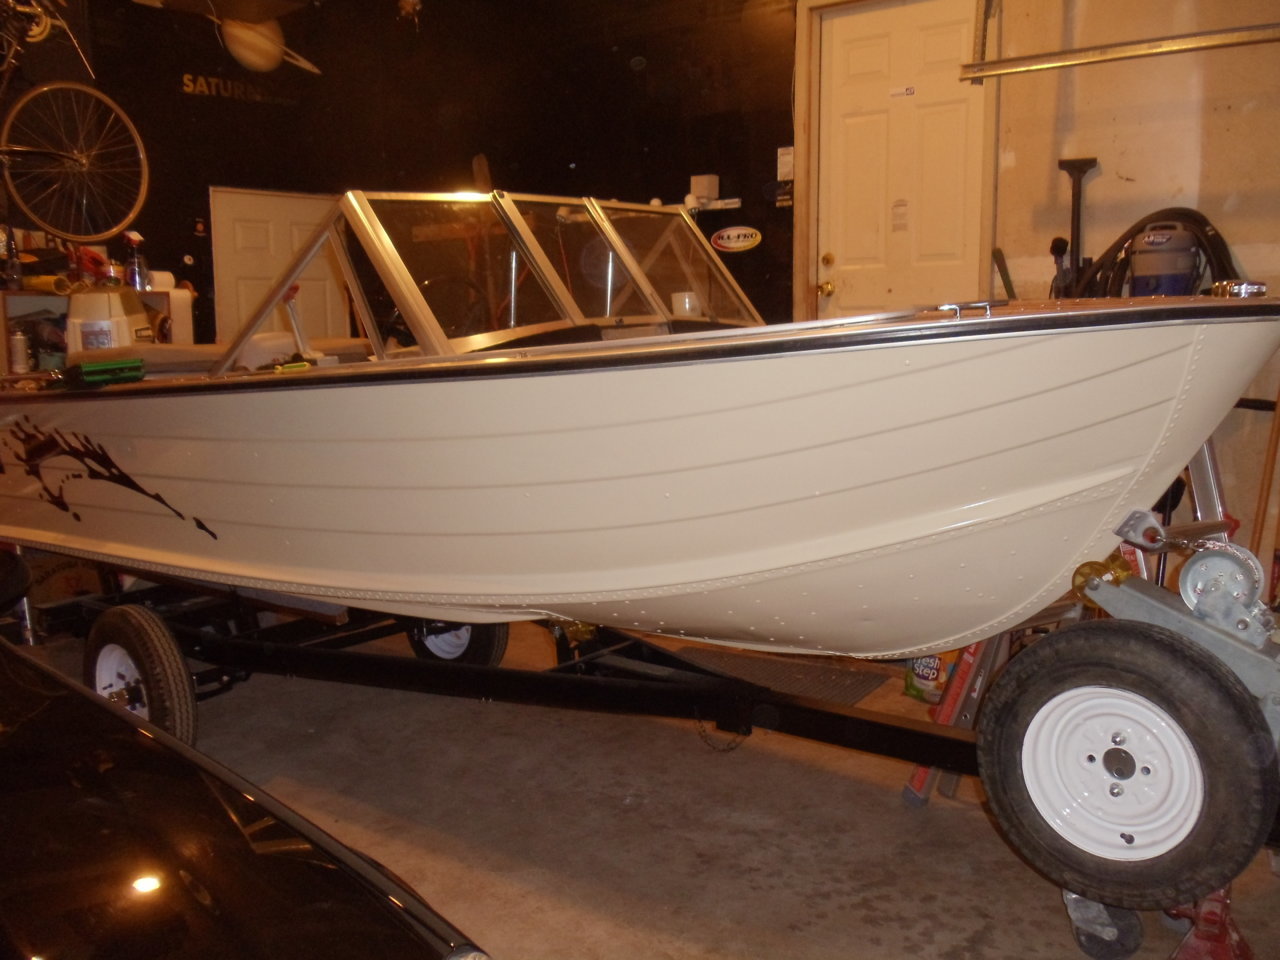 Looking for another Project Boat Picture heavy